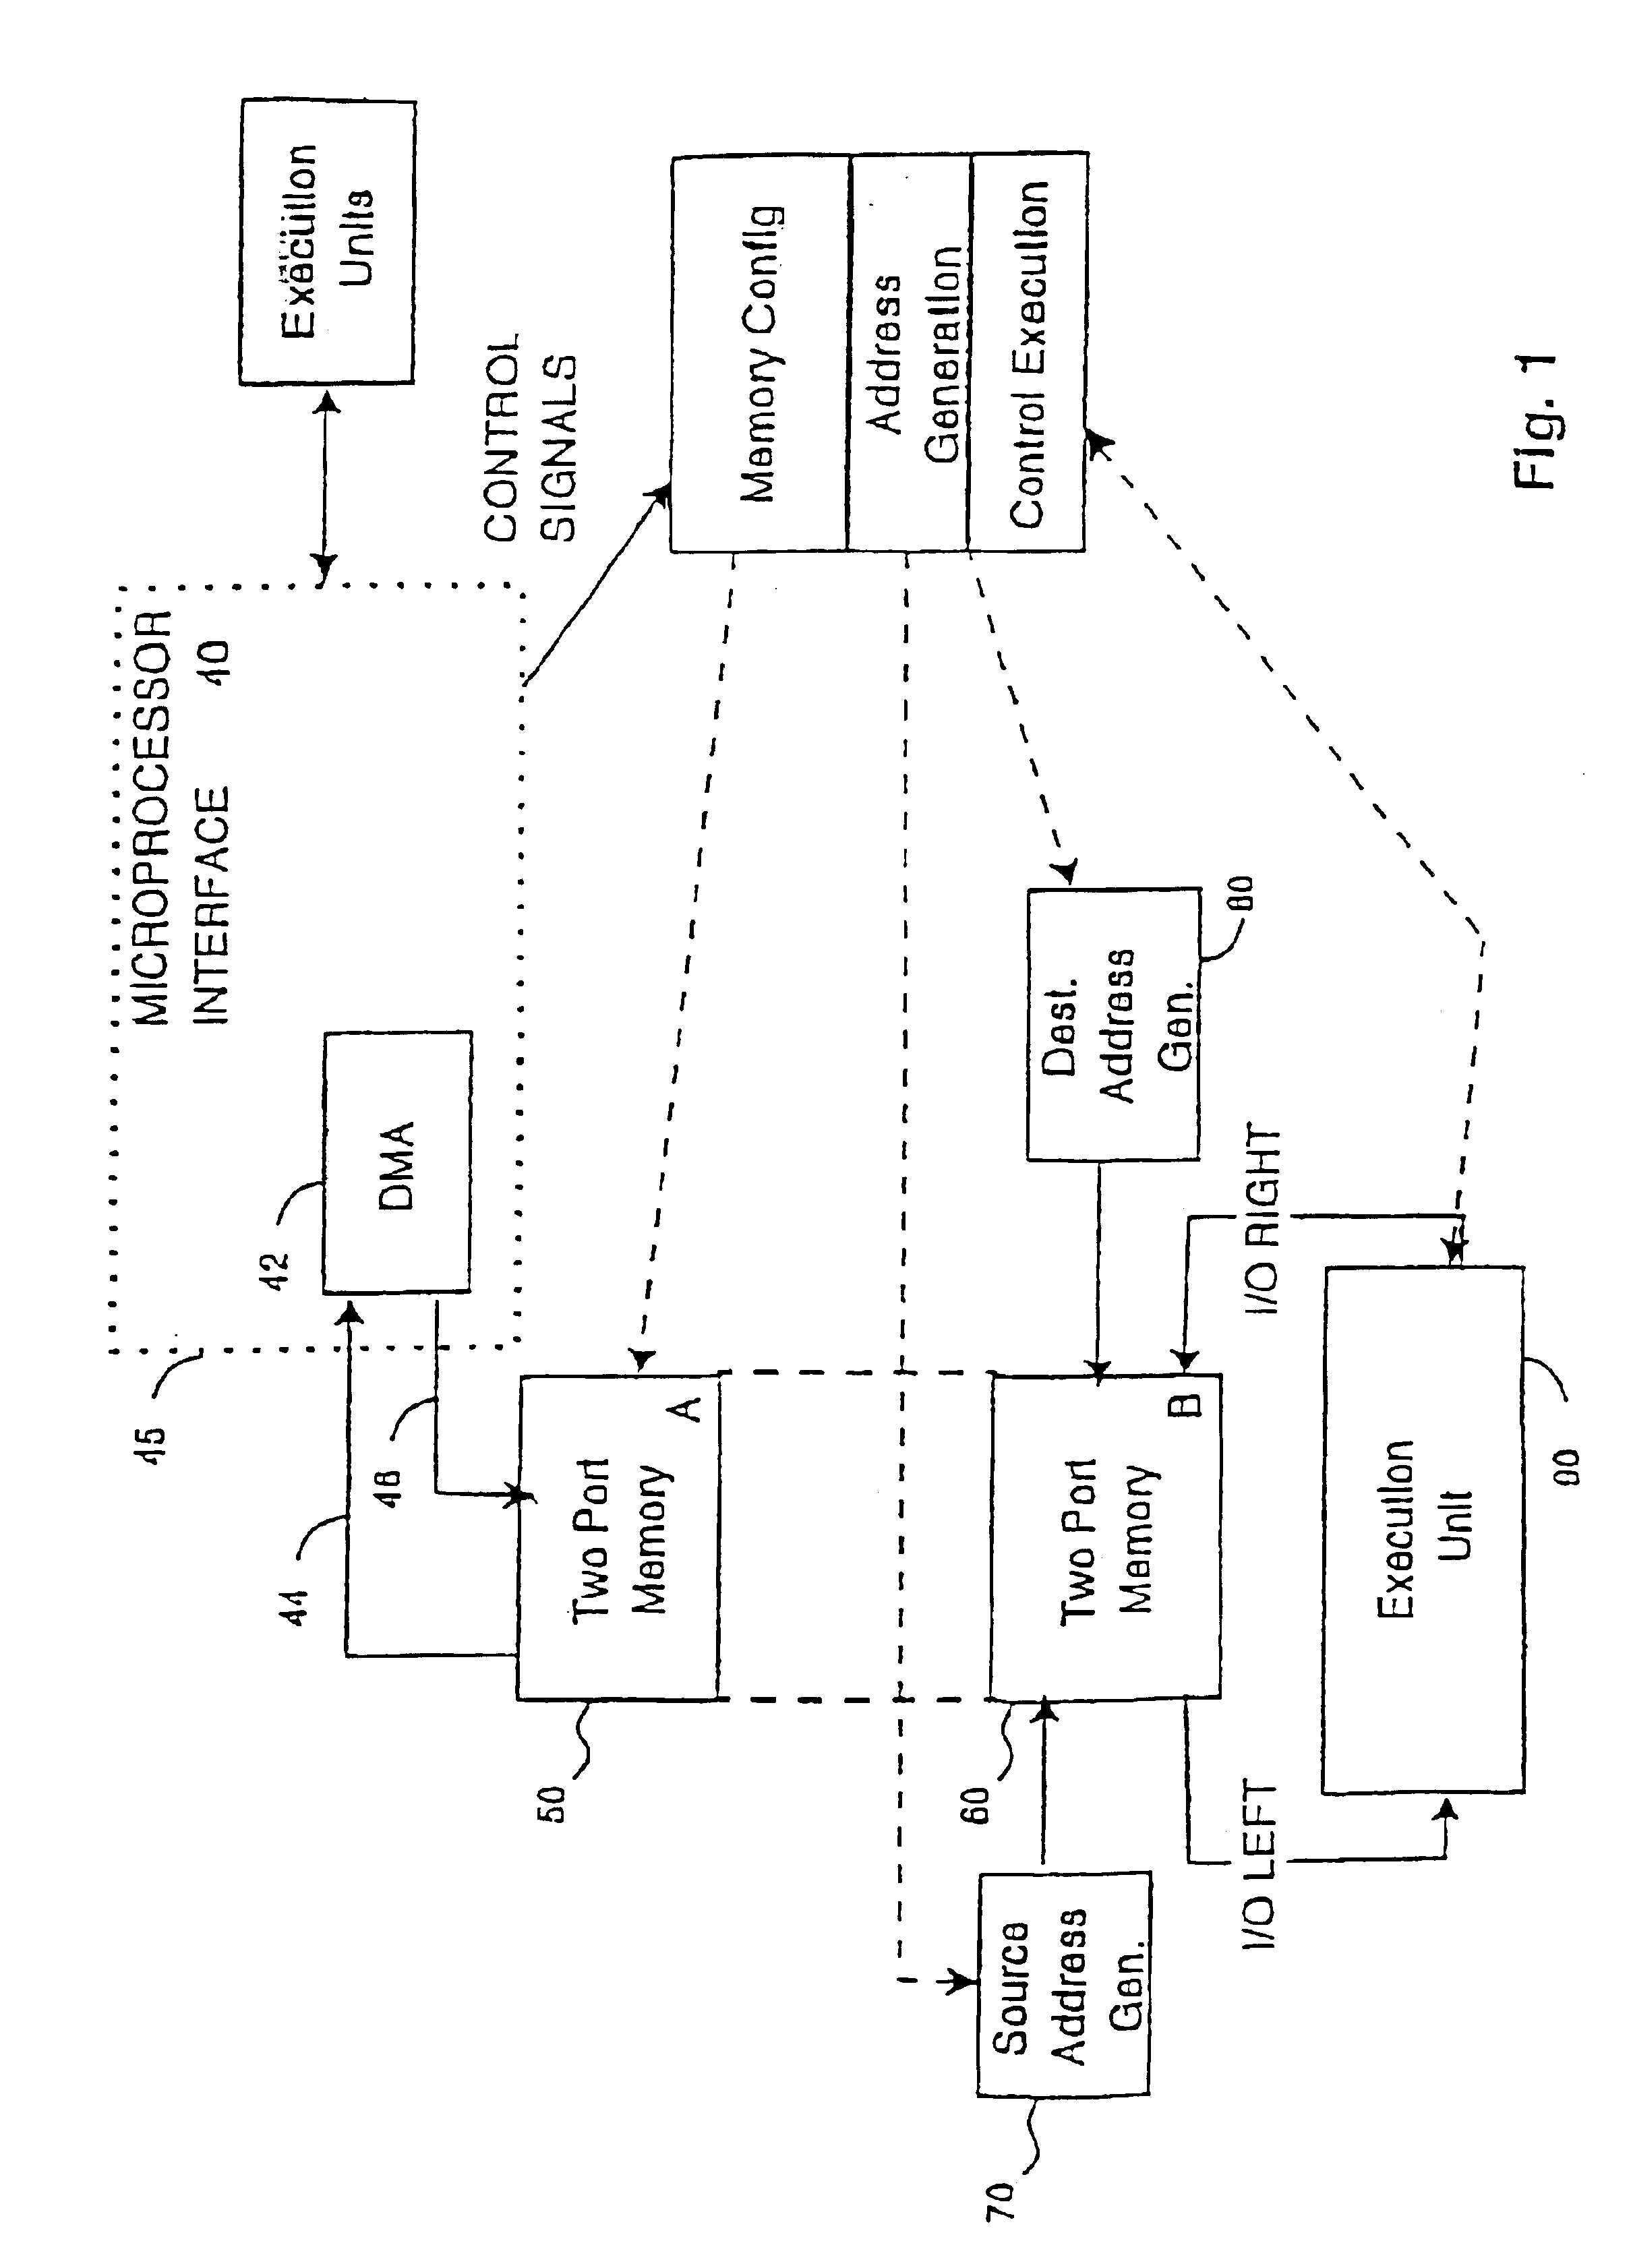 Tightly coupled and scalable memory and execution unit architecture